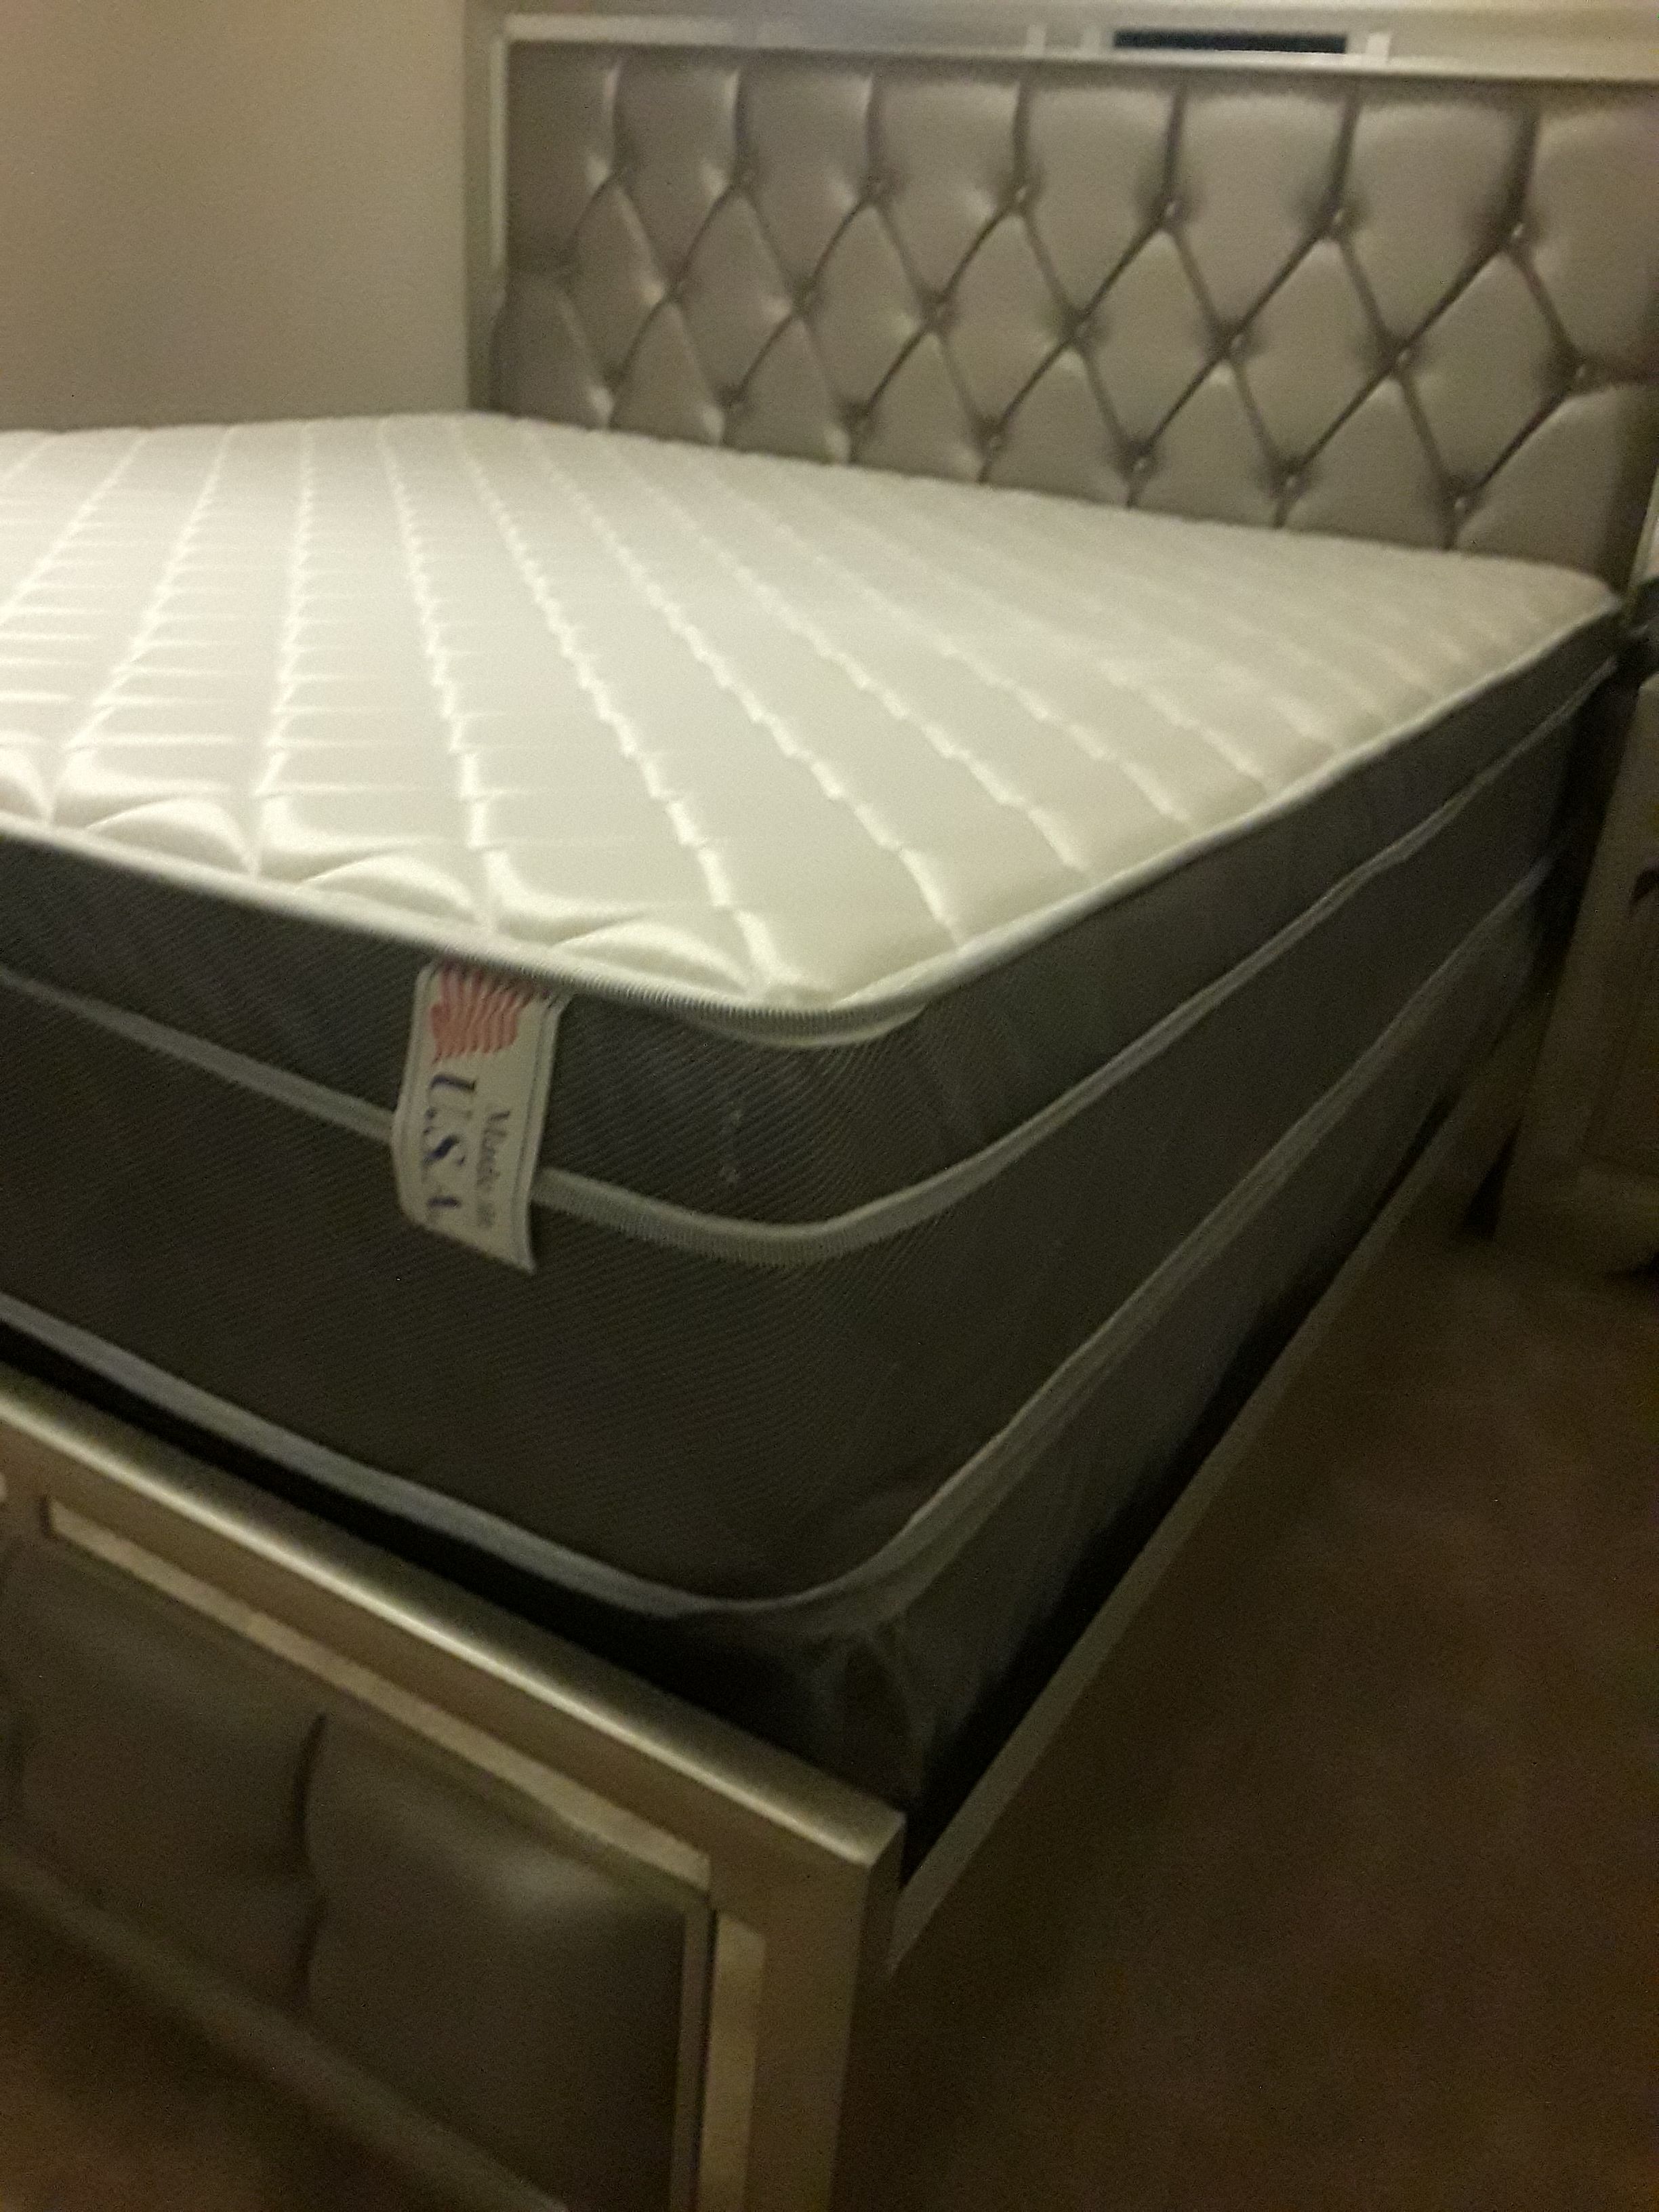 Pillow top queen size mattress sets 269.99 free delivery (Mattress and box spring only )